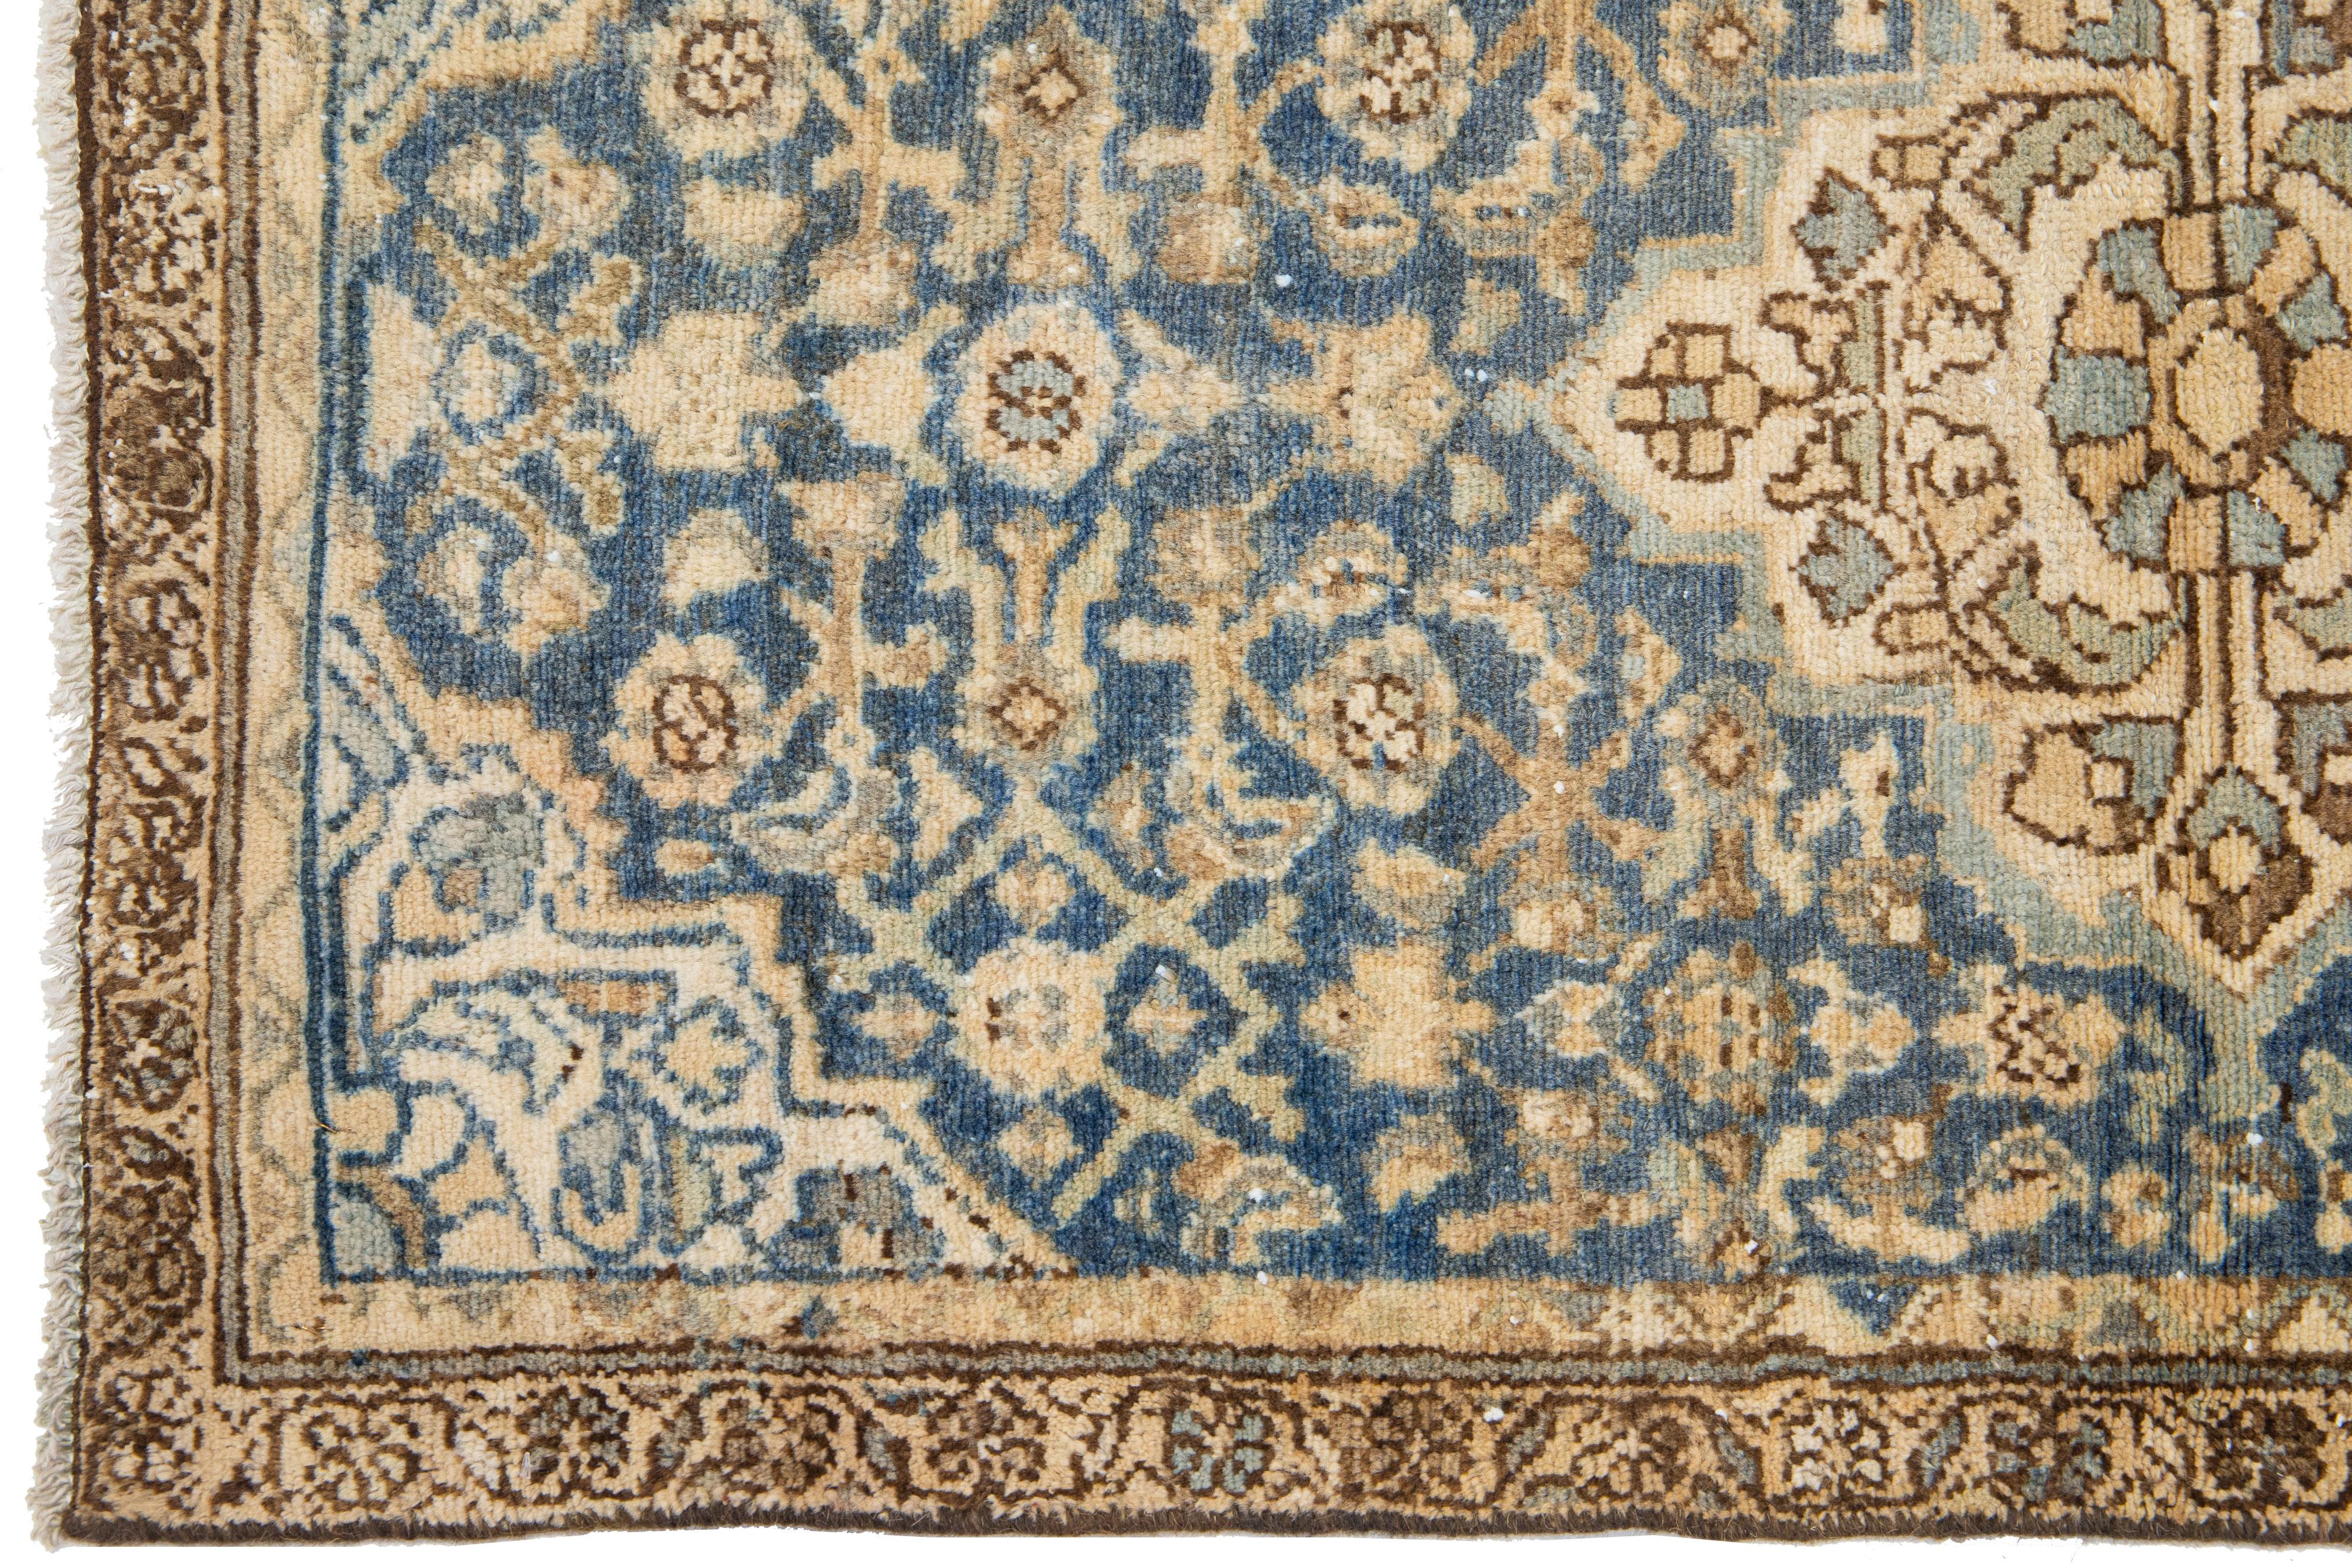 Medallion Antique Persian Hamadan Wool Rug In Blue In Good Condition For Sale In Norwalk, CT